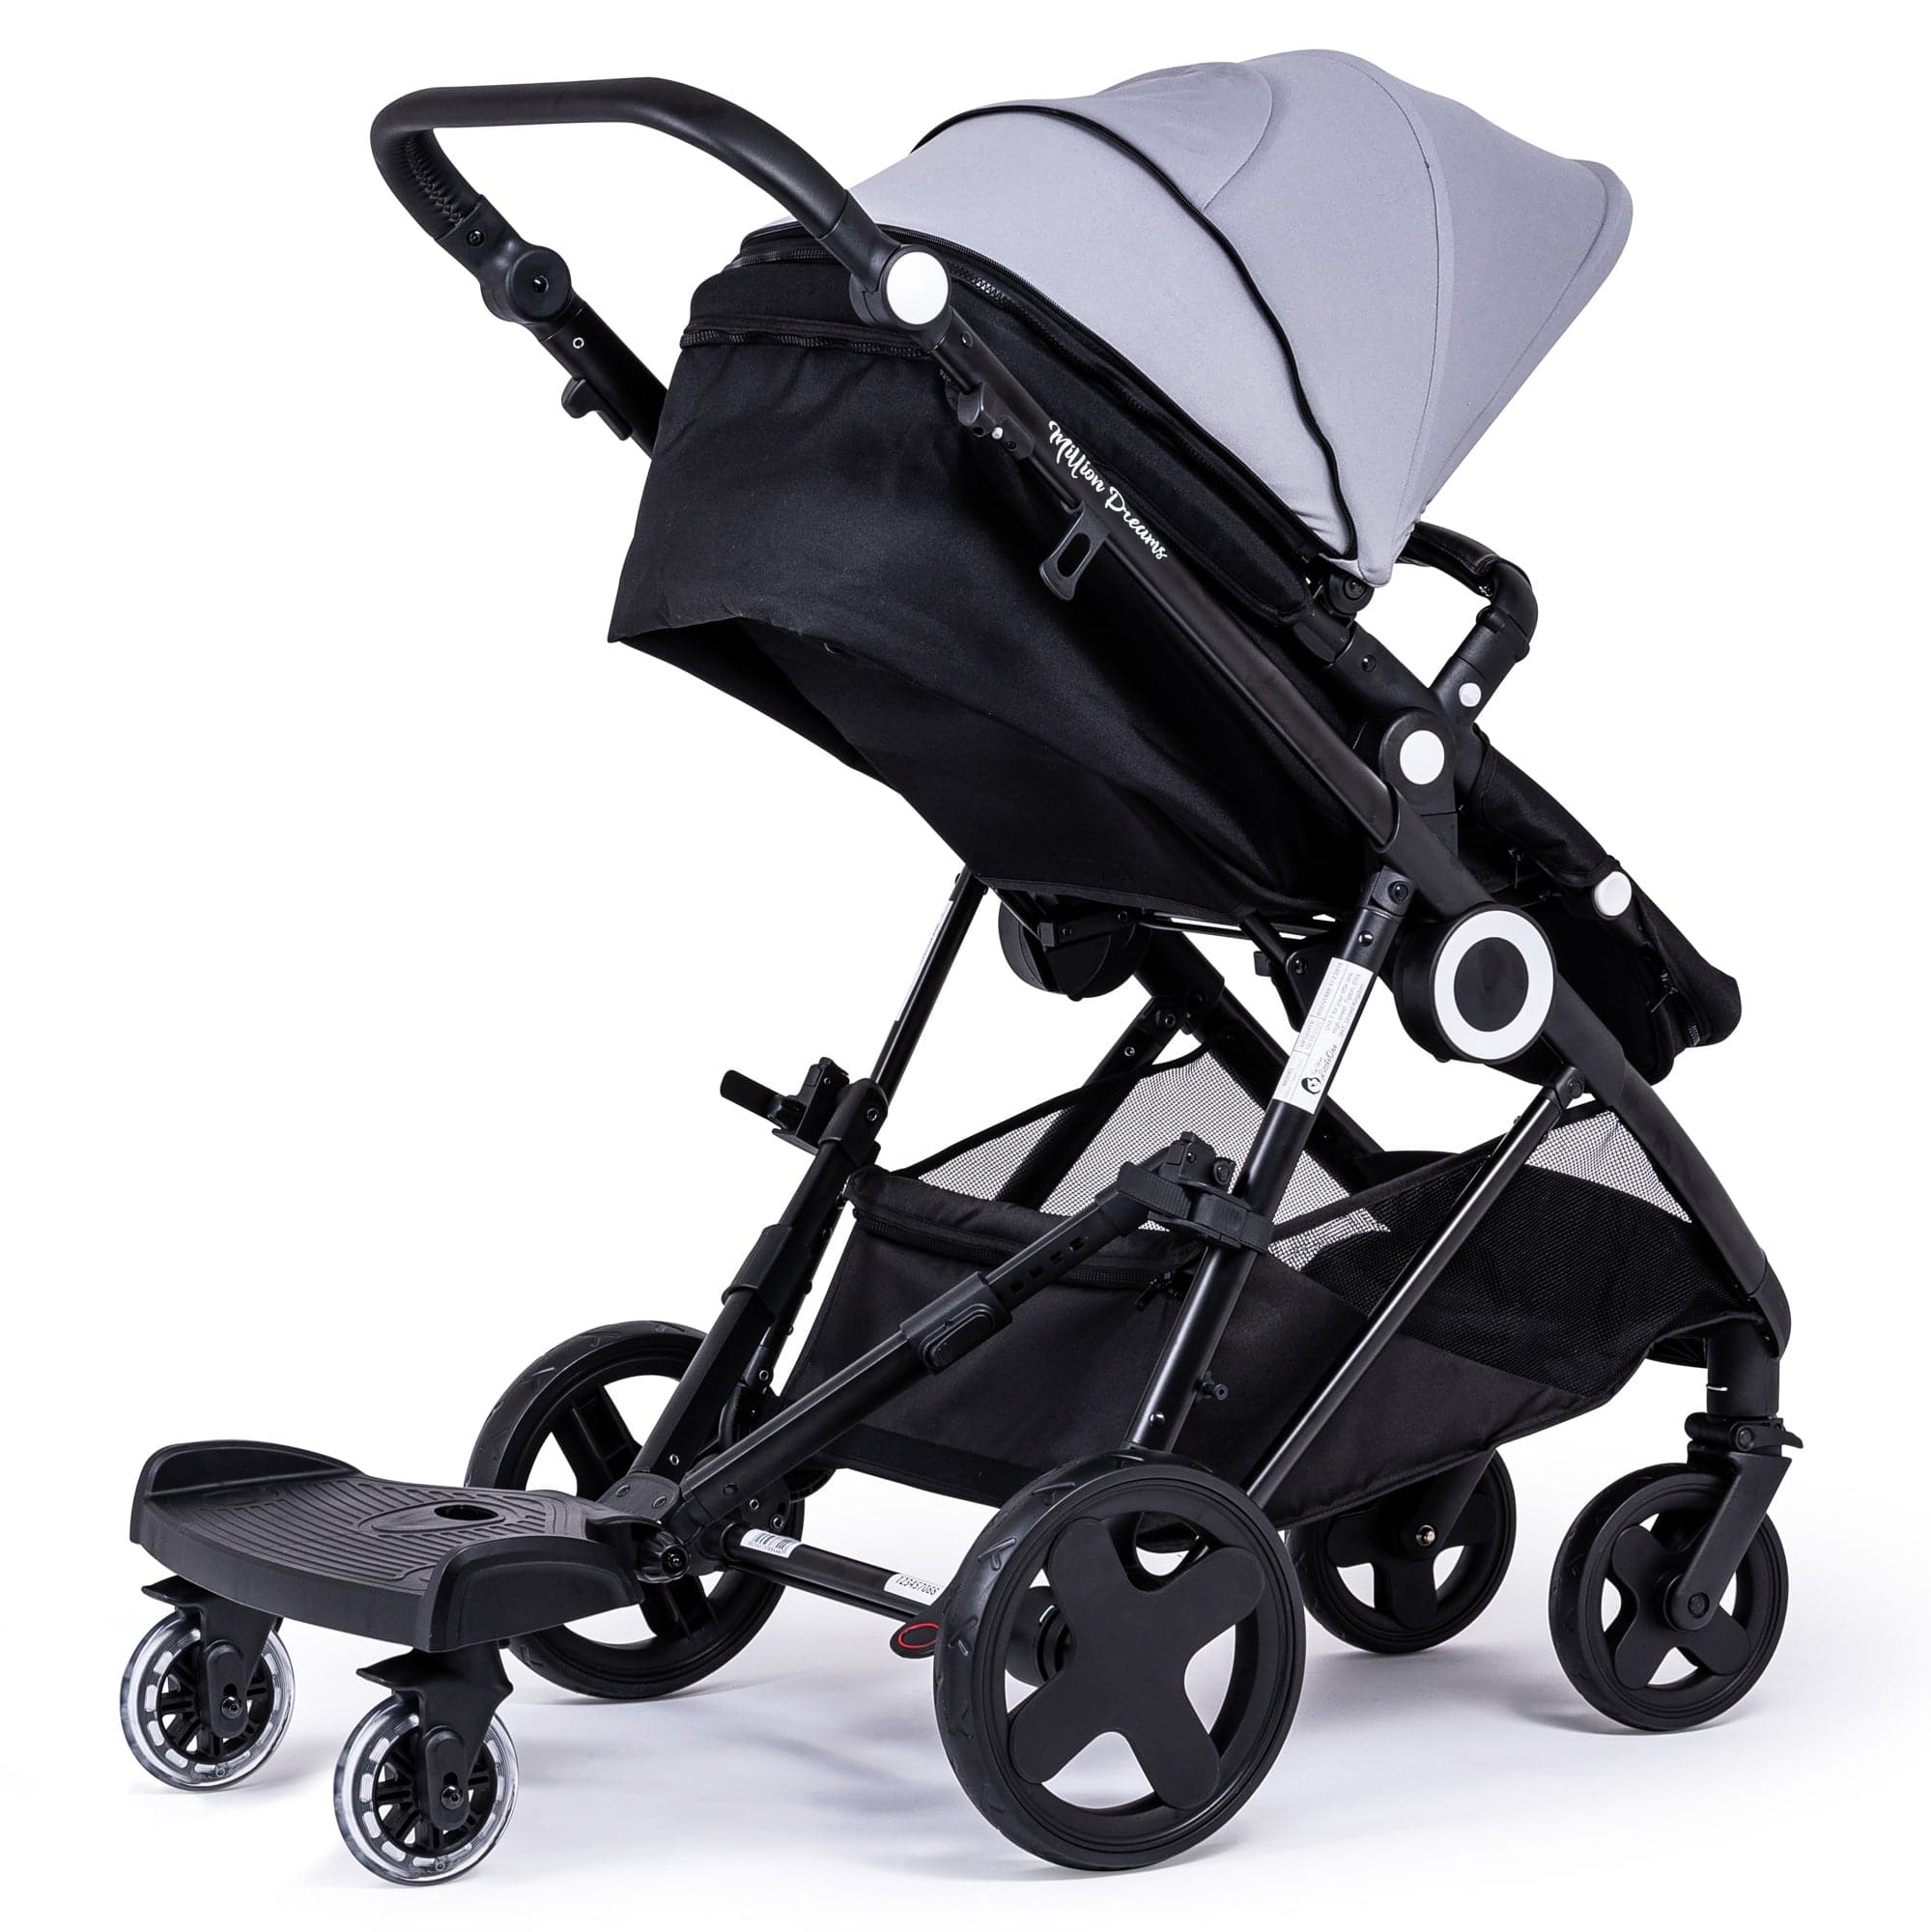 Ride On Board with Saddle Compatible with Maxi Cosi - For Your Little One